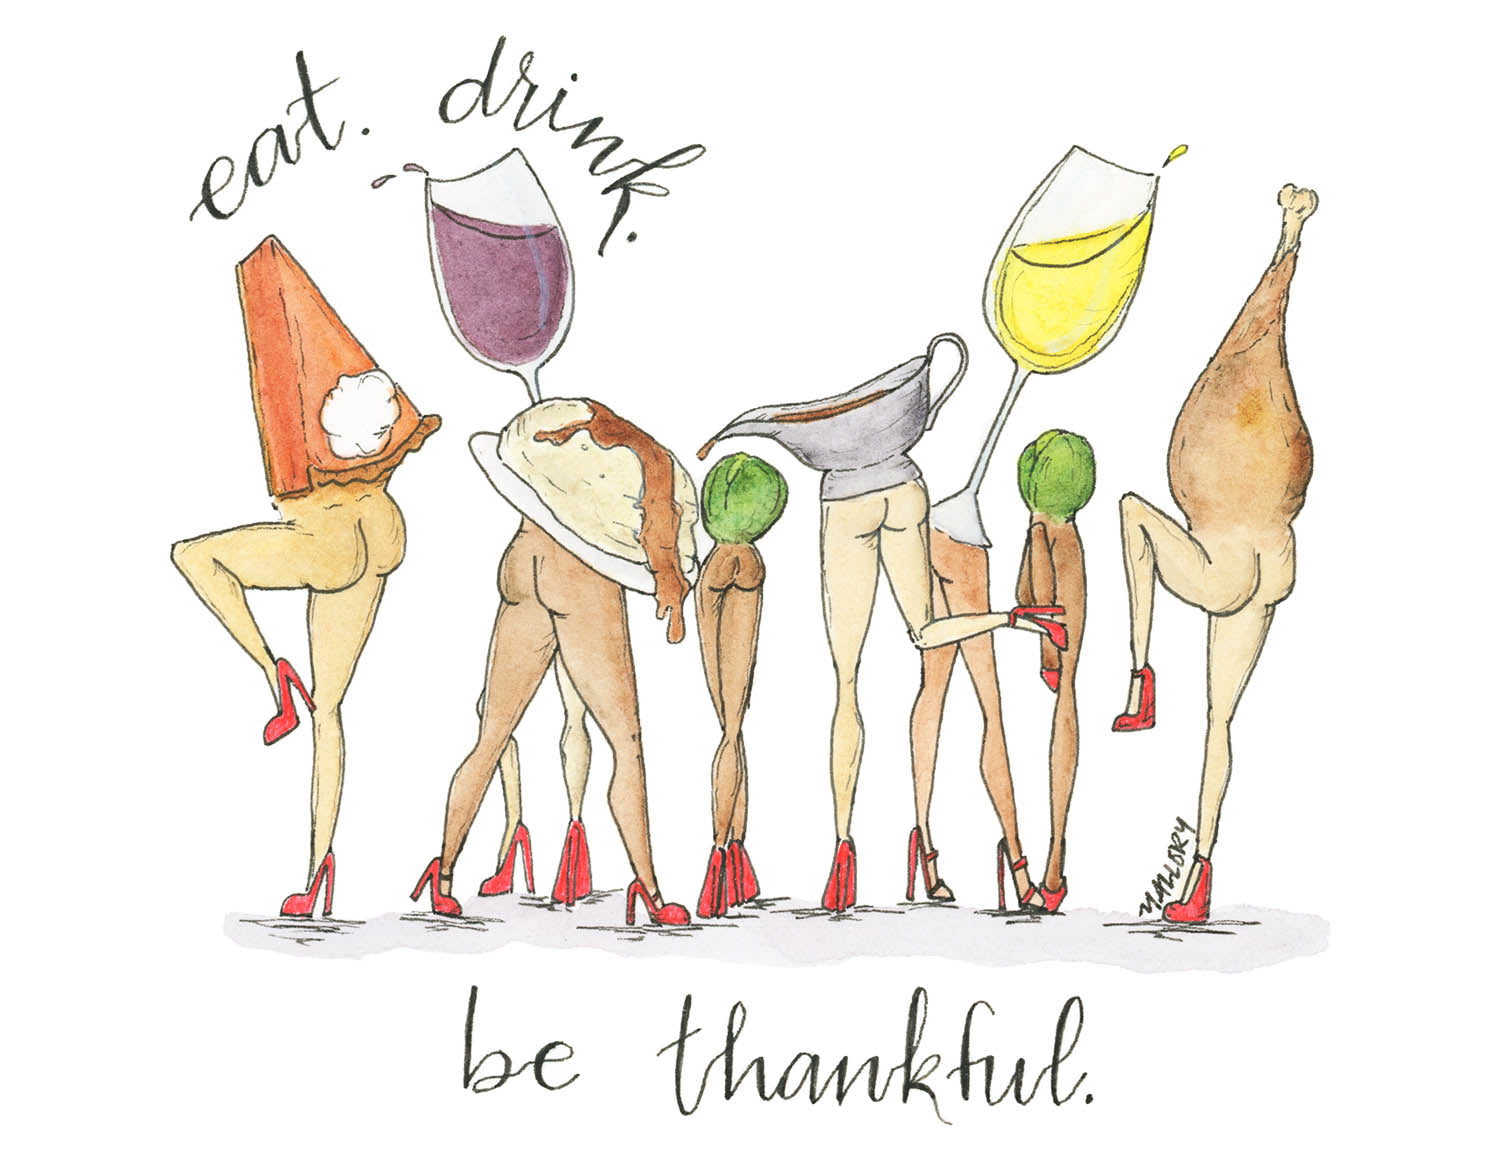 Thanksgiving or Friendsgiving card depicts a funny image with Thanksgiving food with legs. The food is dancing with wine and the phrase, "eat. drink. be thankful." is hand-lettered.